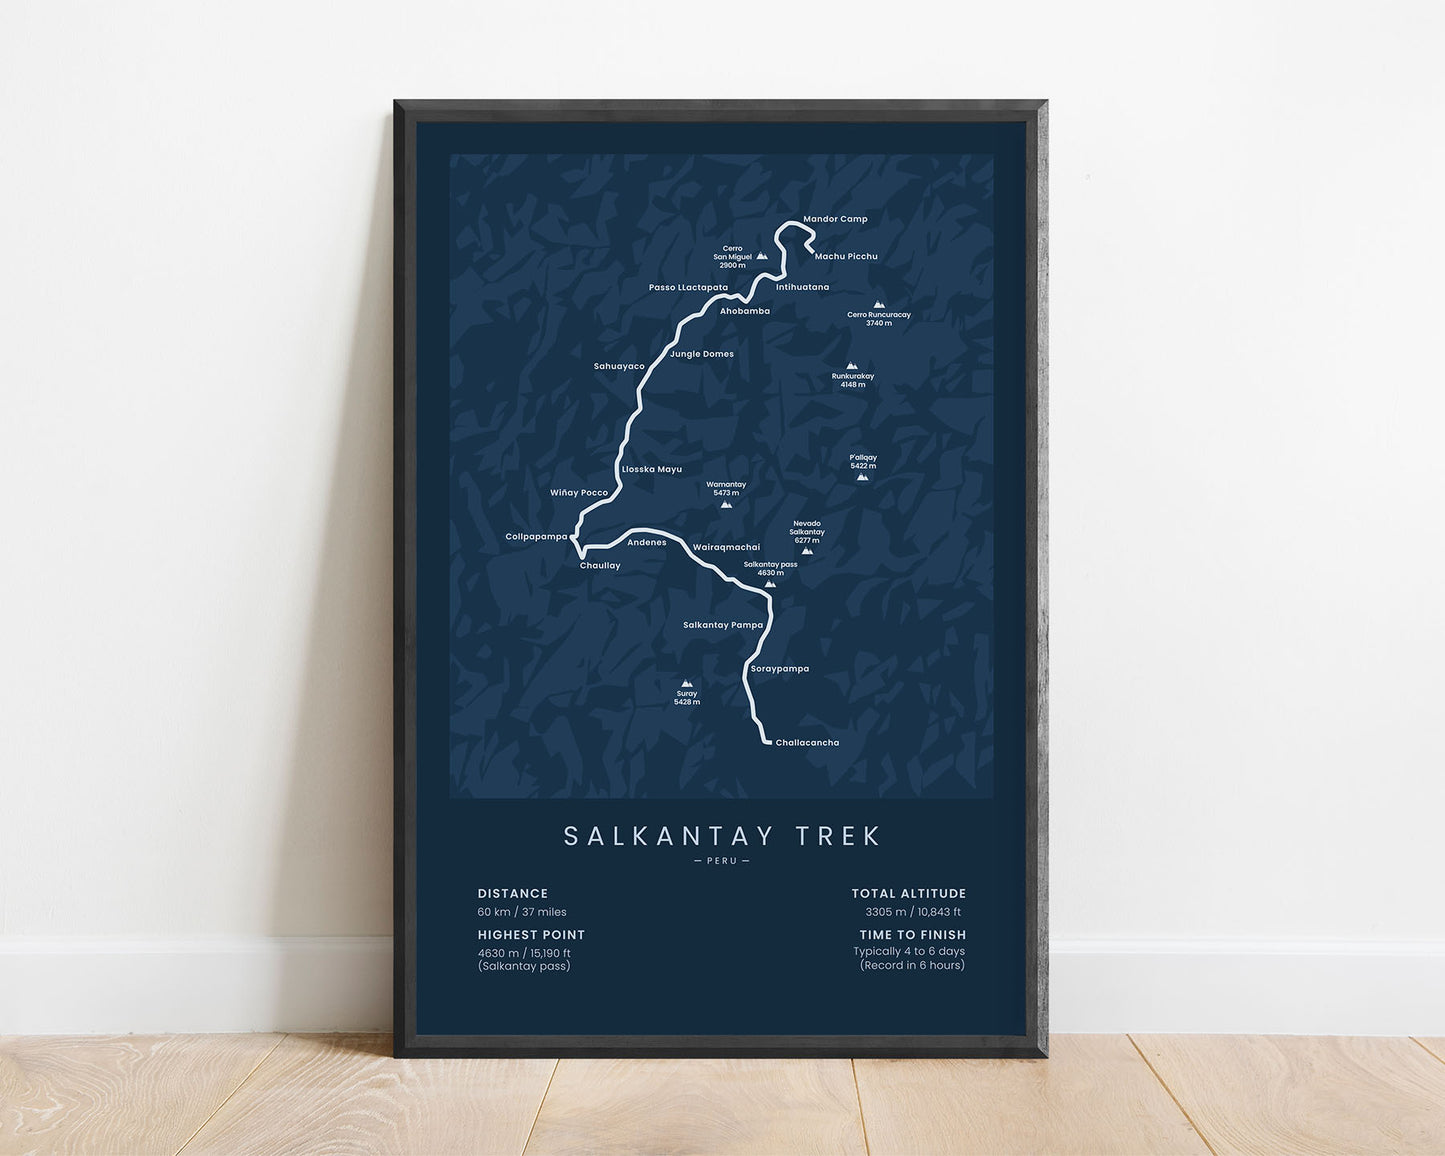 Salkantay Trek (South America) track poster with blue background